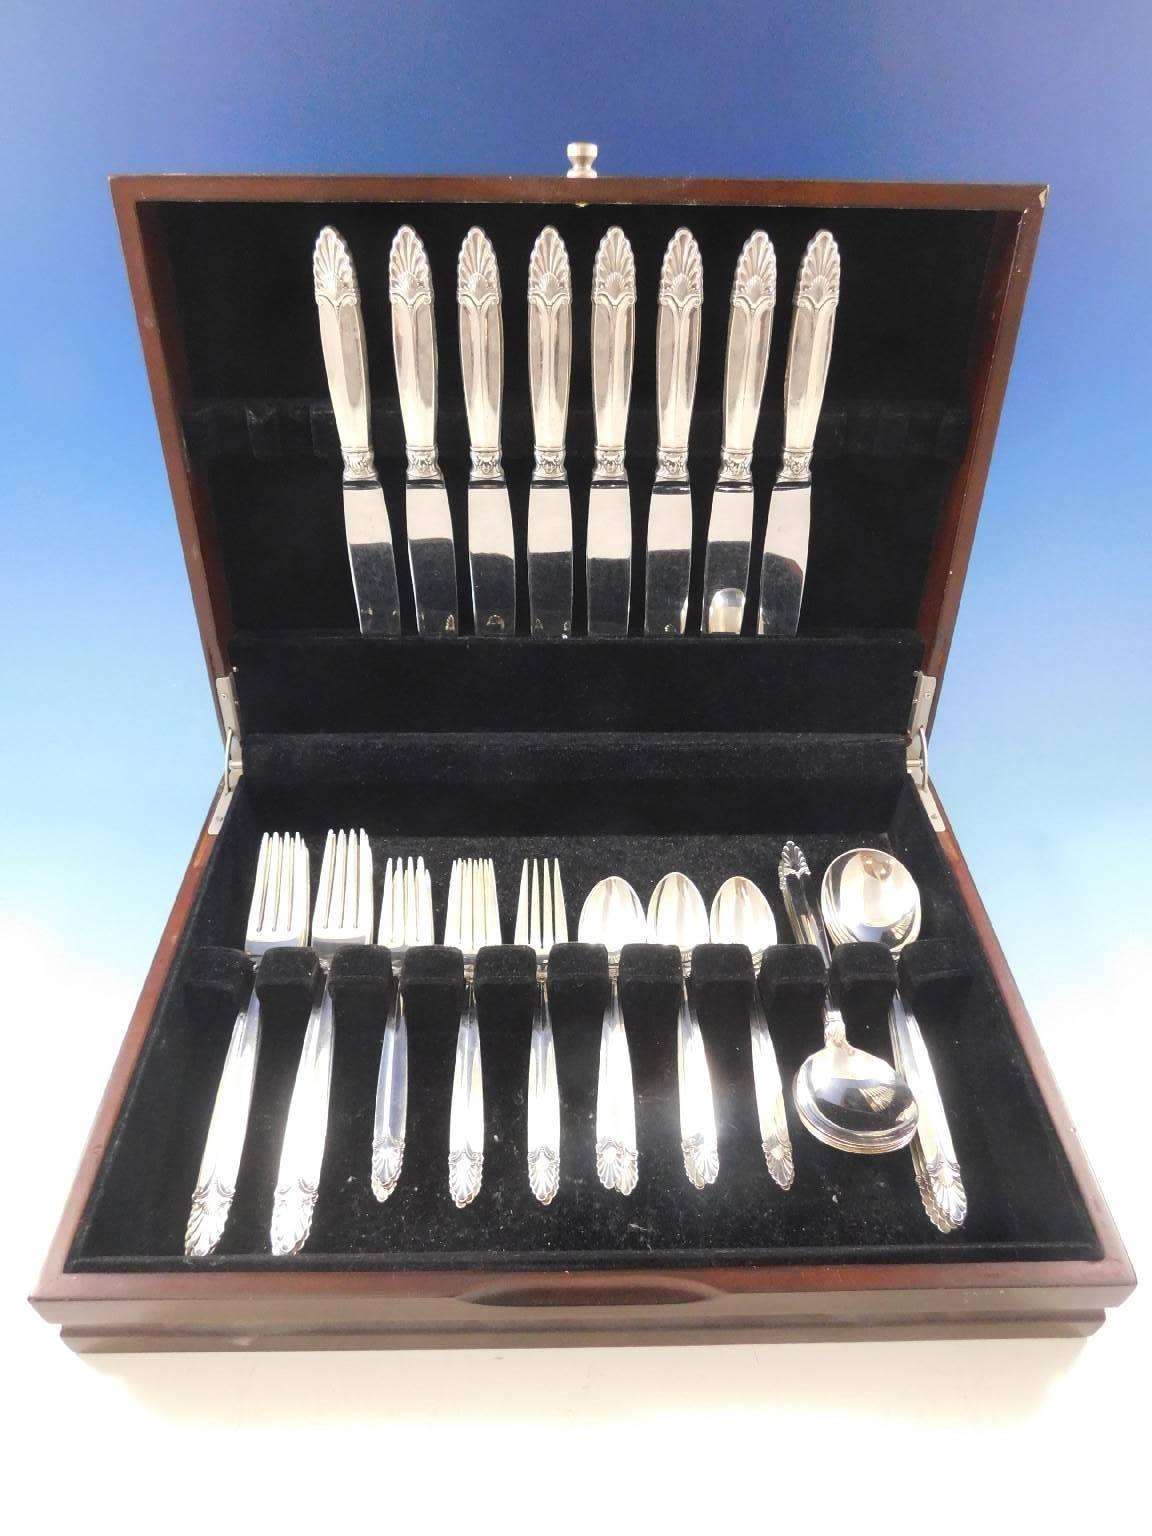 Dinner size Empress by international sterling silver flatware set of 40 pieces. This set includes:

Eight dinner size knives, 9 1/2